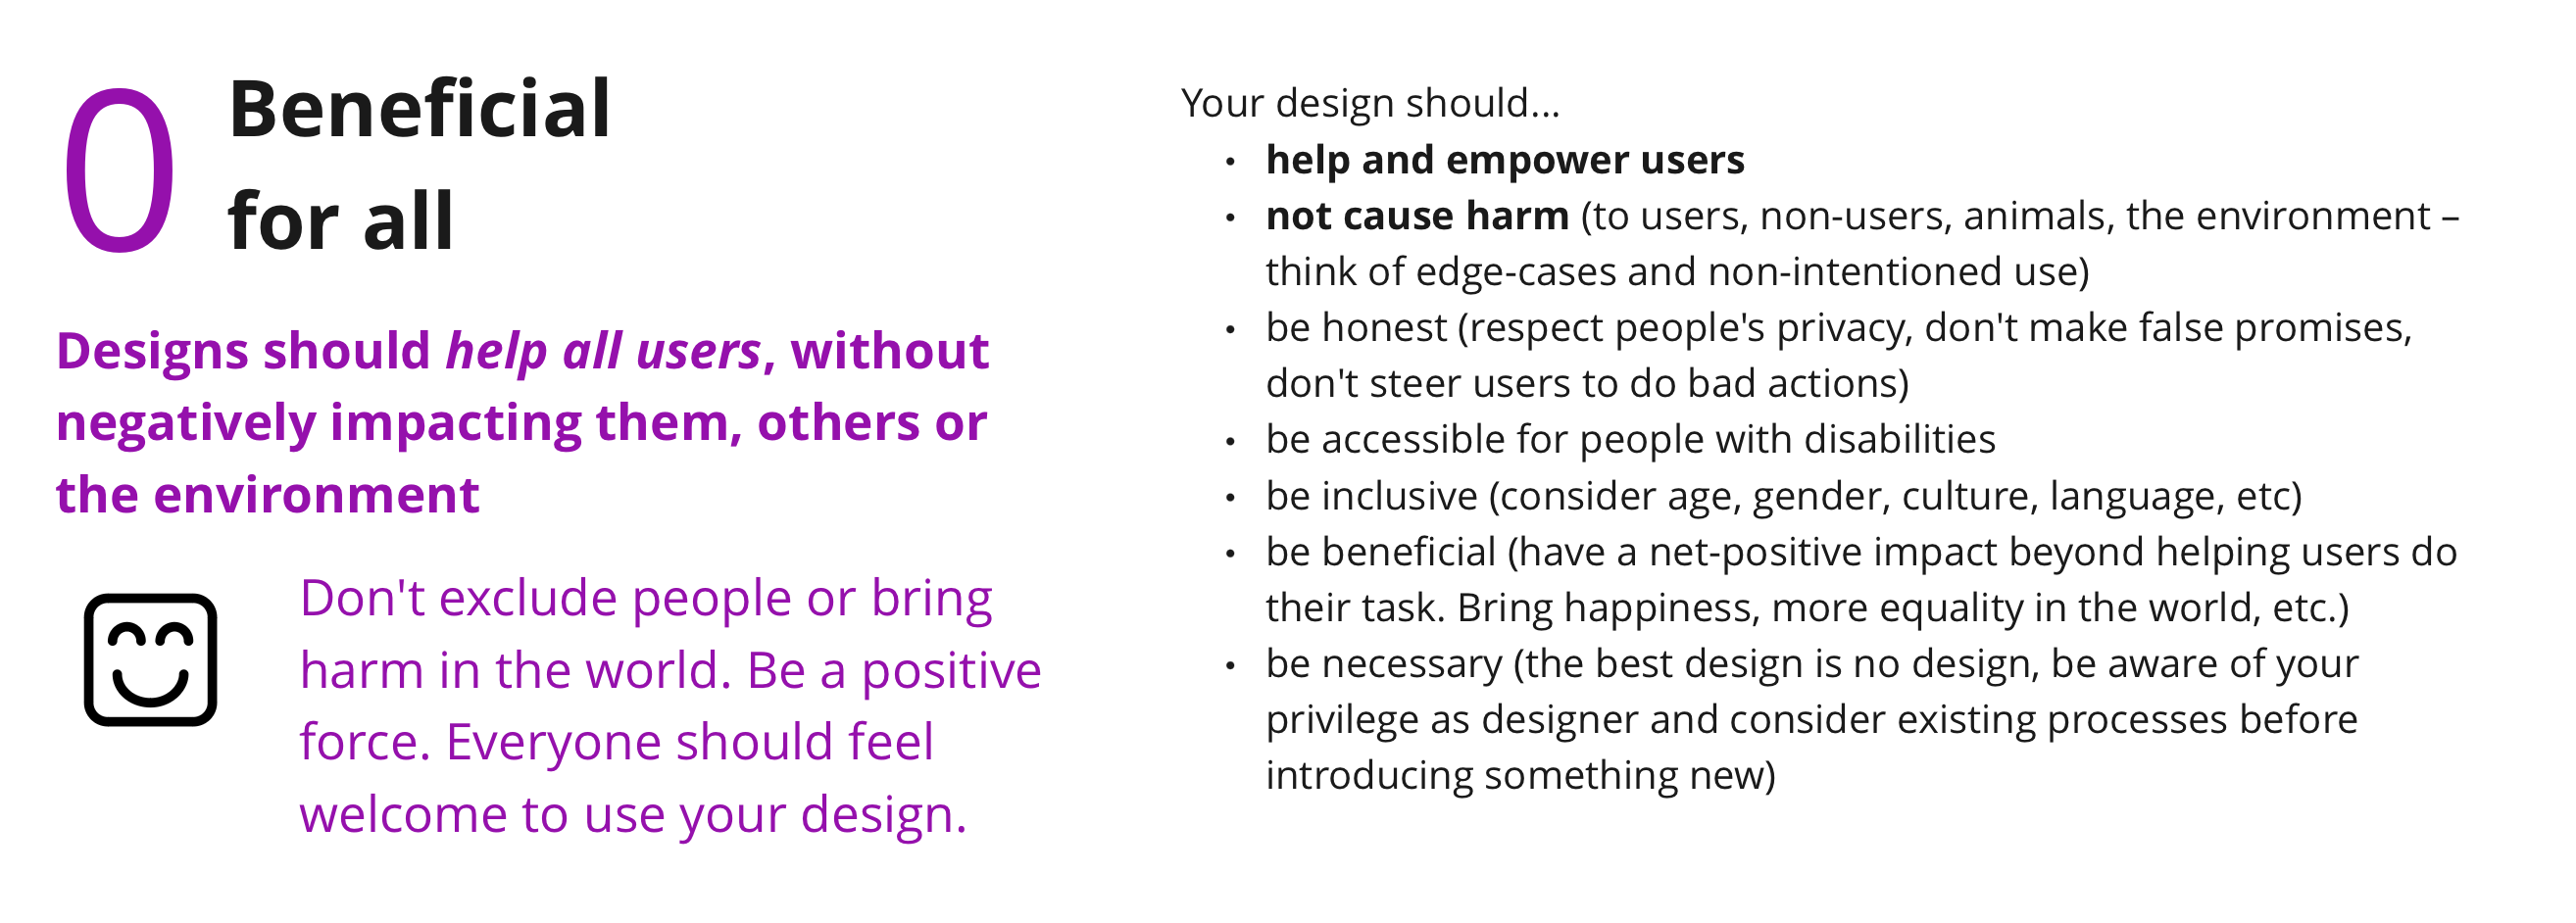 Heuristic 0: &ldquo;Design should be beneficial for all&rdquo;